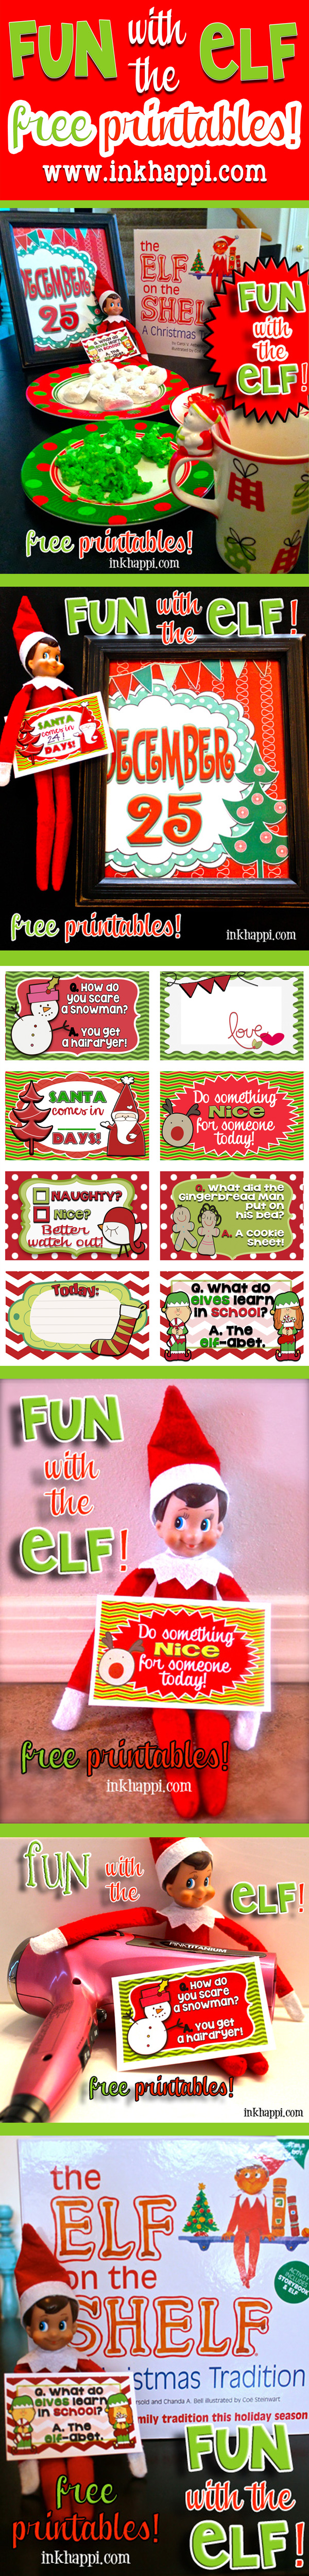 Fun with the Elf... or not Elf.... Some great printable cards for the elf or to use as lunchbox notes, tags, whatever you want! Plus some fun ideas!